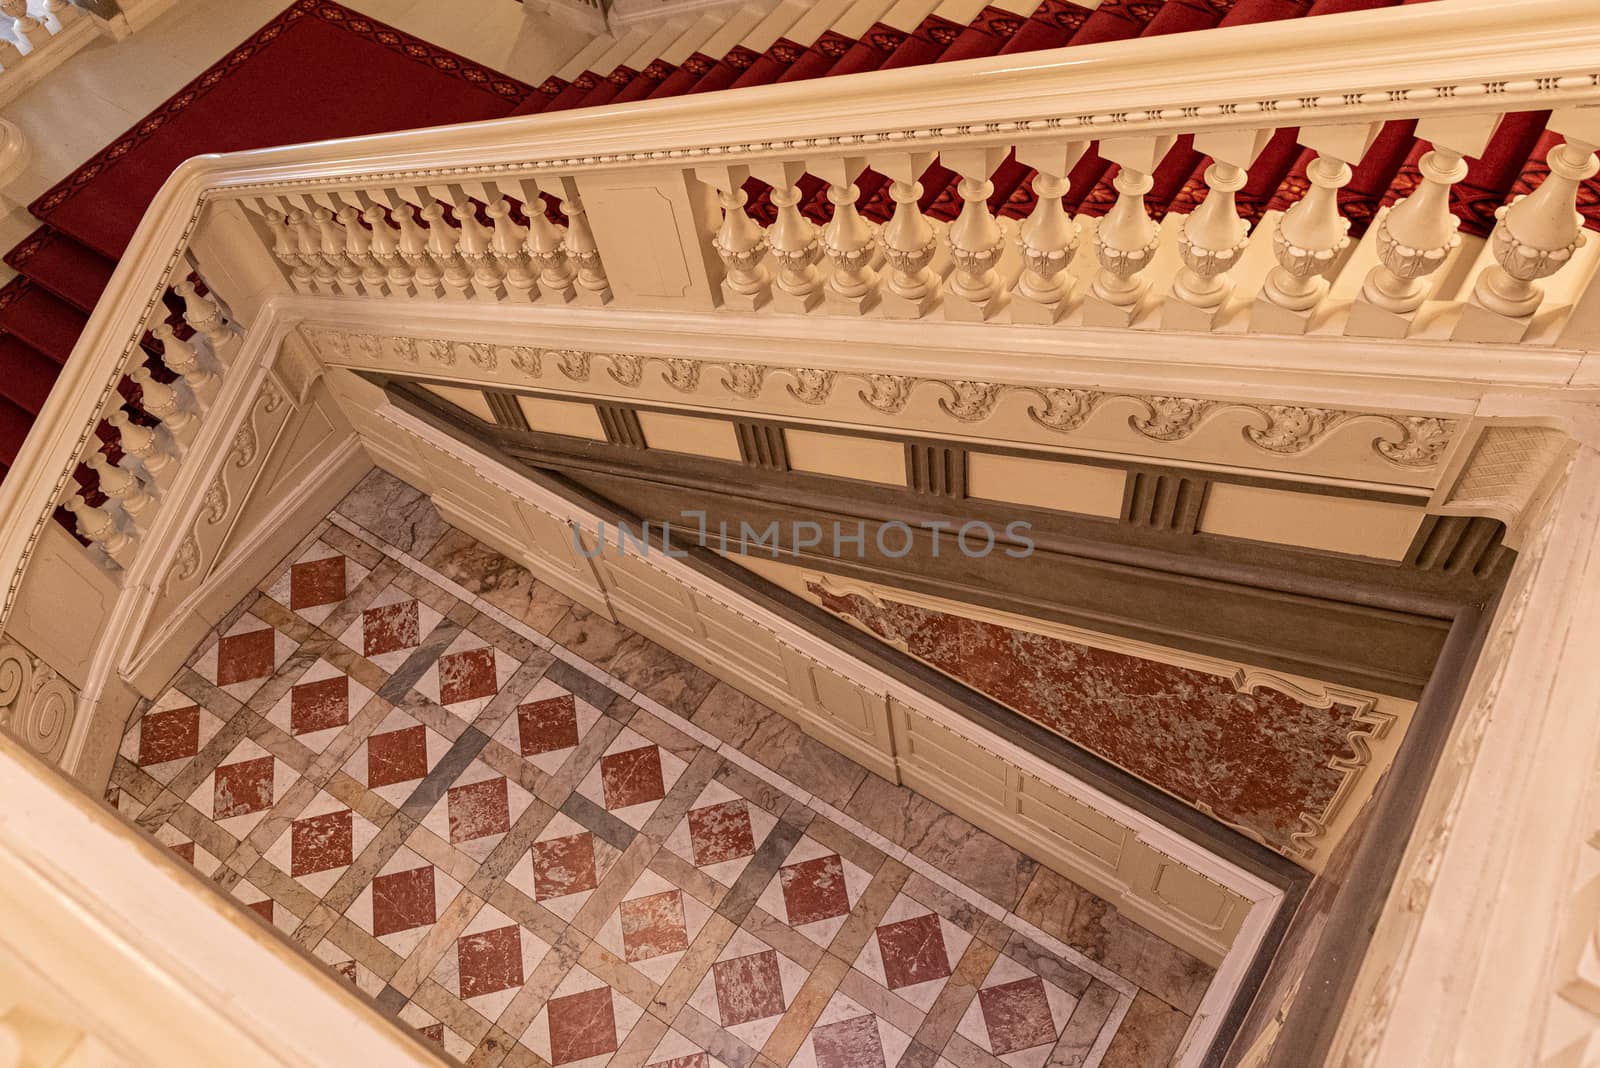 Interiors of royal halls in Christiansborg Palace in Copenhagen Denmark, ancient staircase